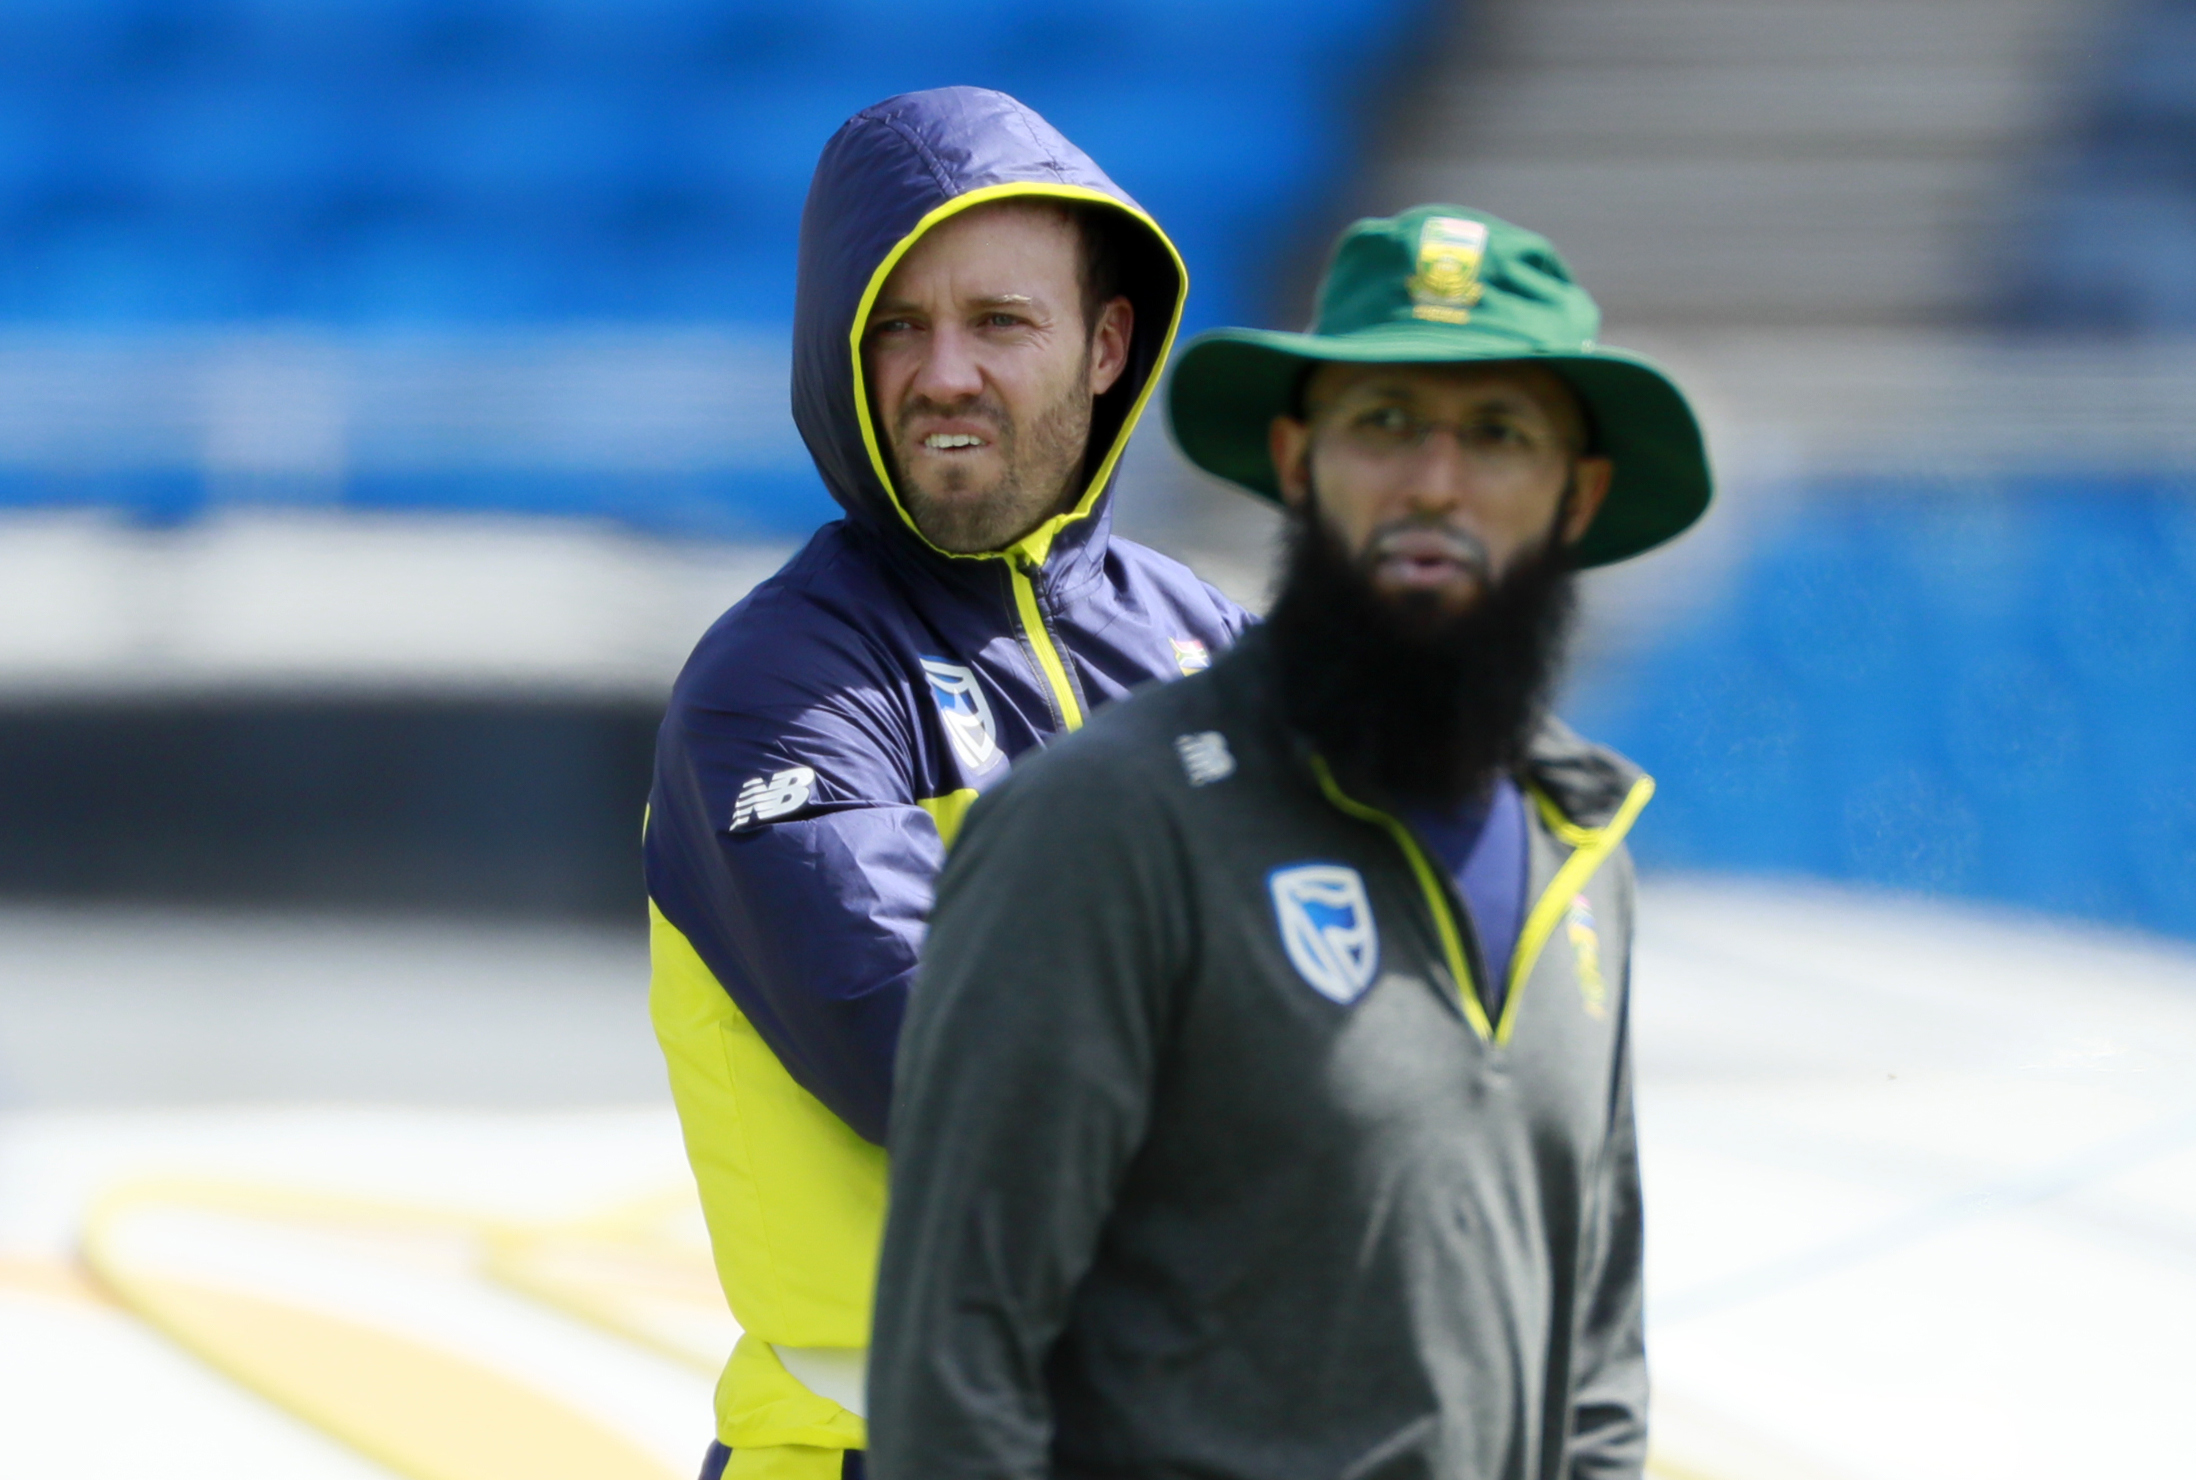 Cricket: 'Uneasy' Proteas staying put despite Manchester attack